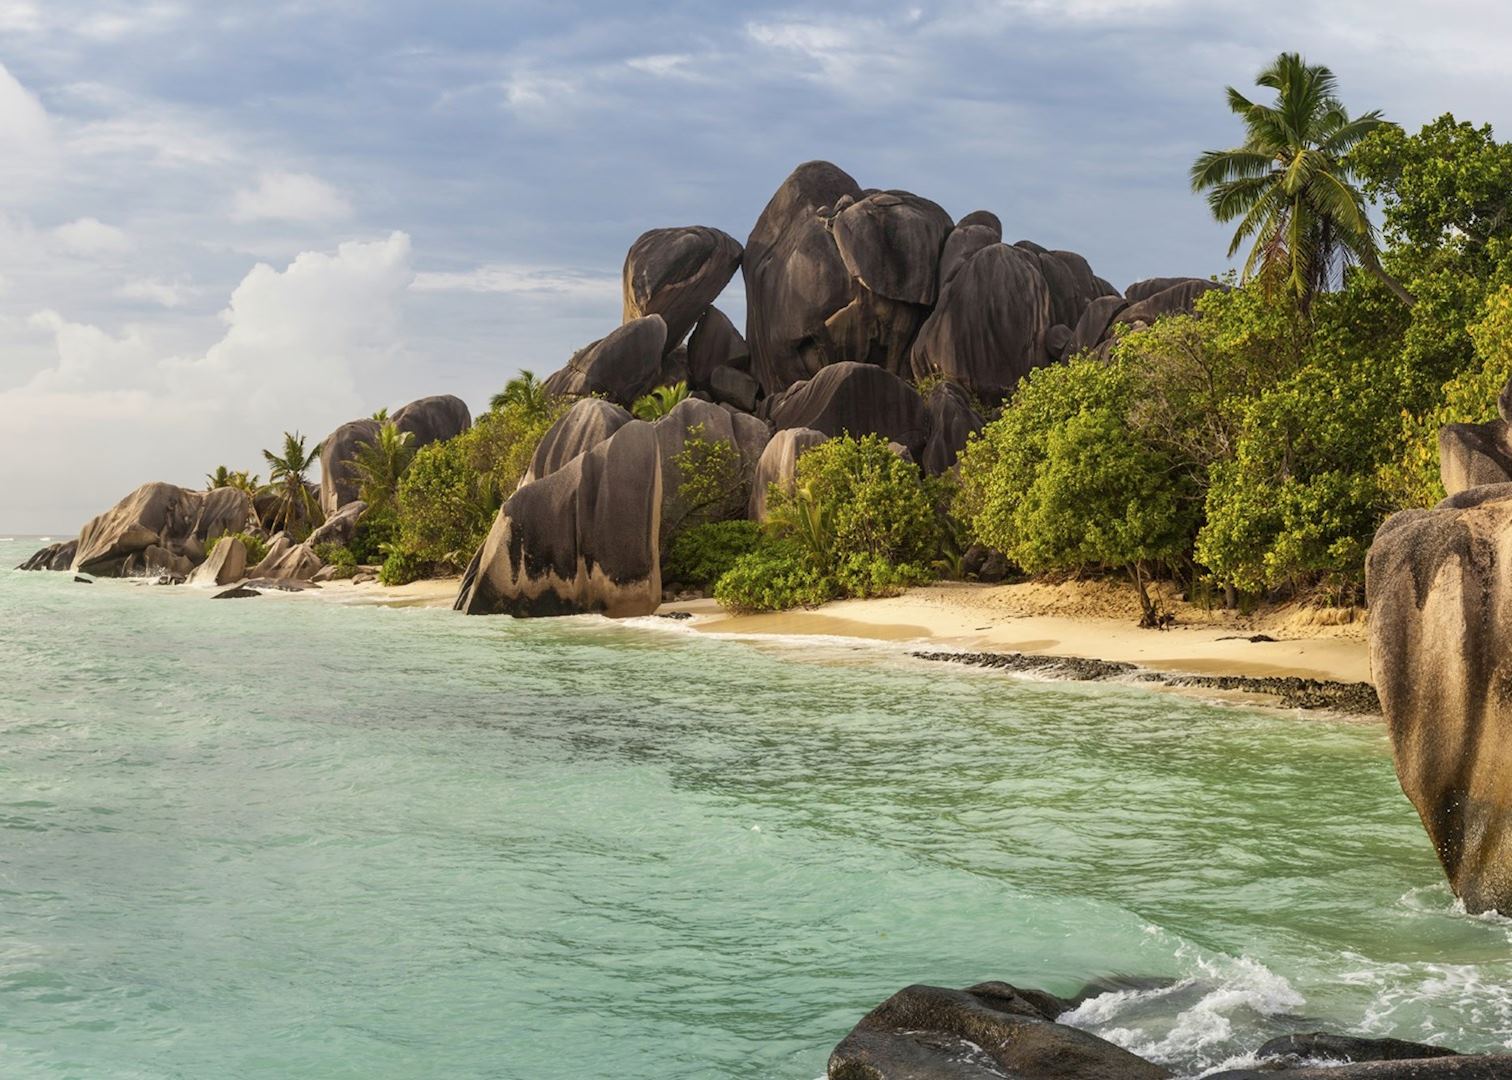 Visit La Digue on a trip to The Seychelles | Audley Travel